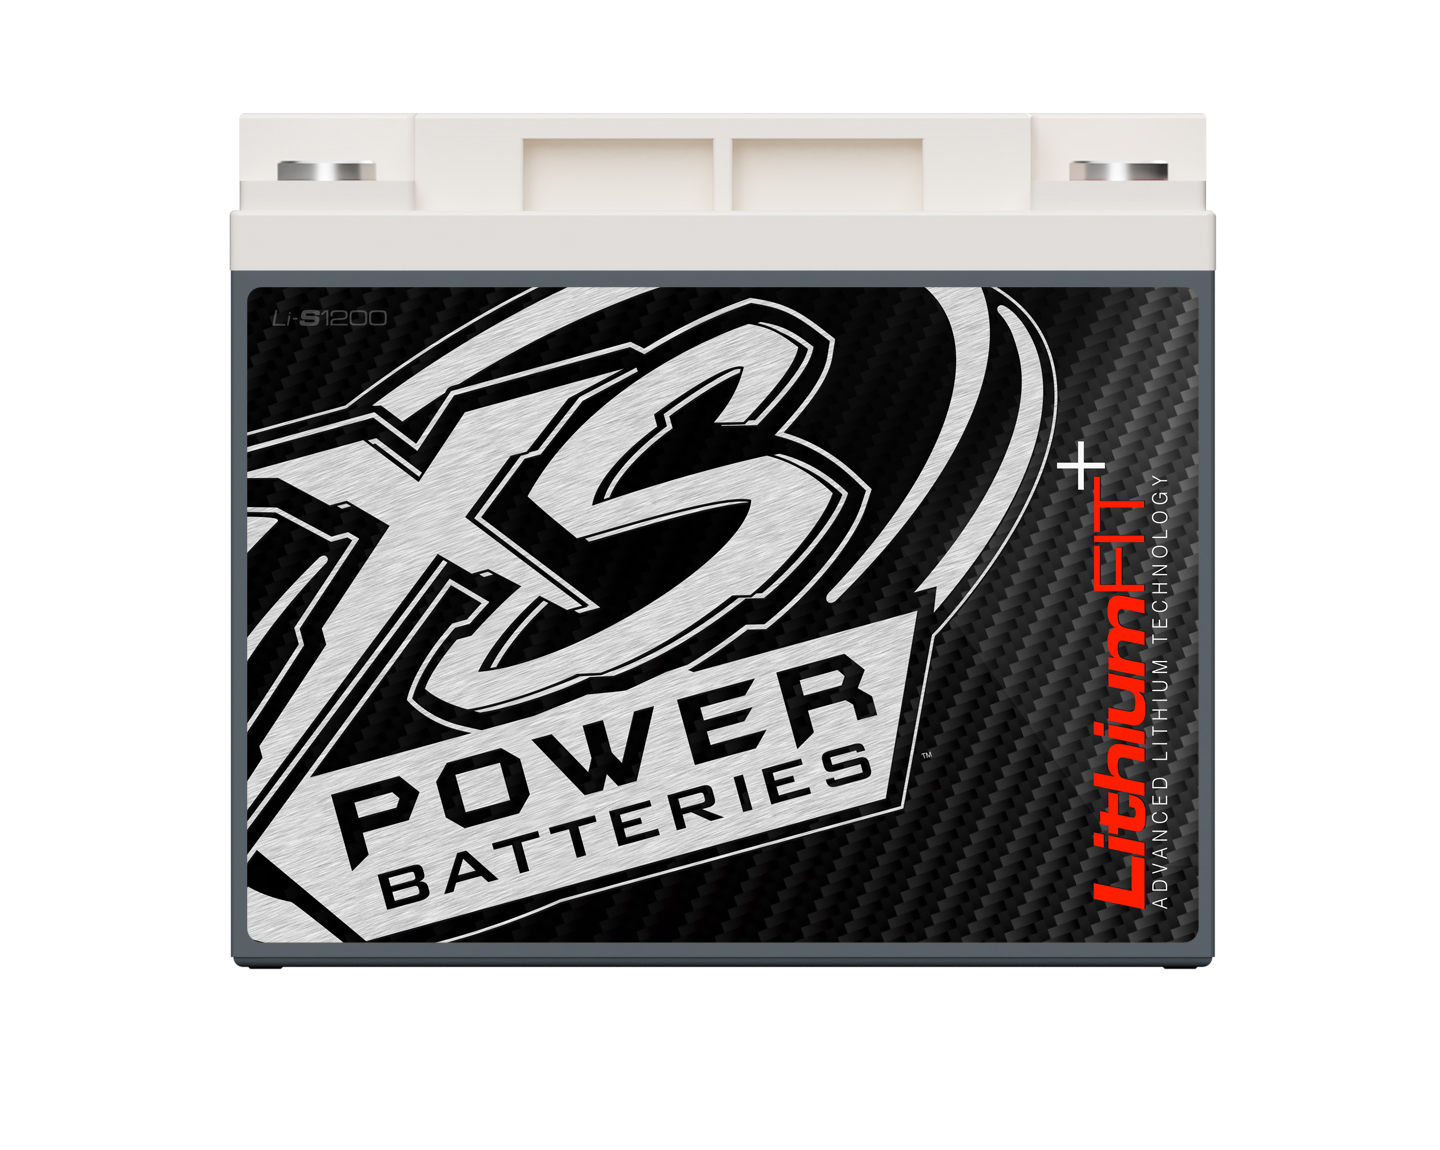 Can we run an alternator with the XS-Power Li-S1200 lithium racing battery?